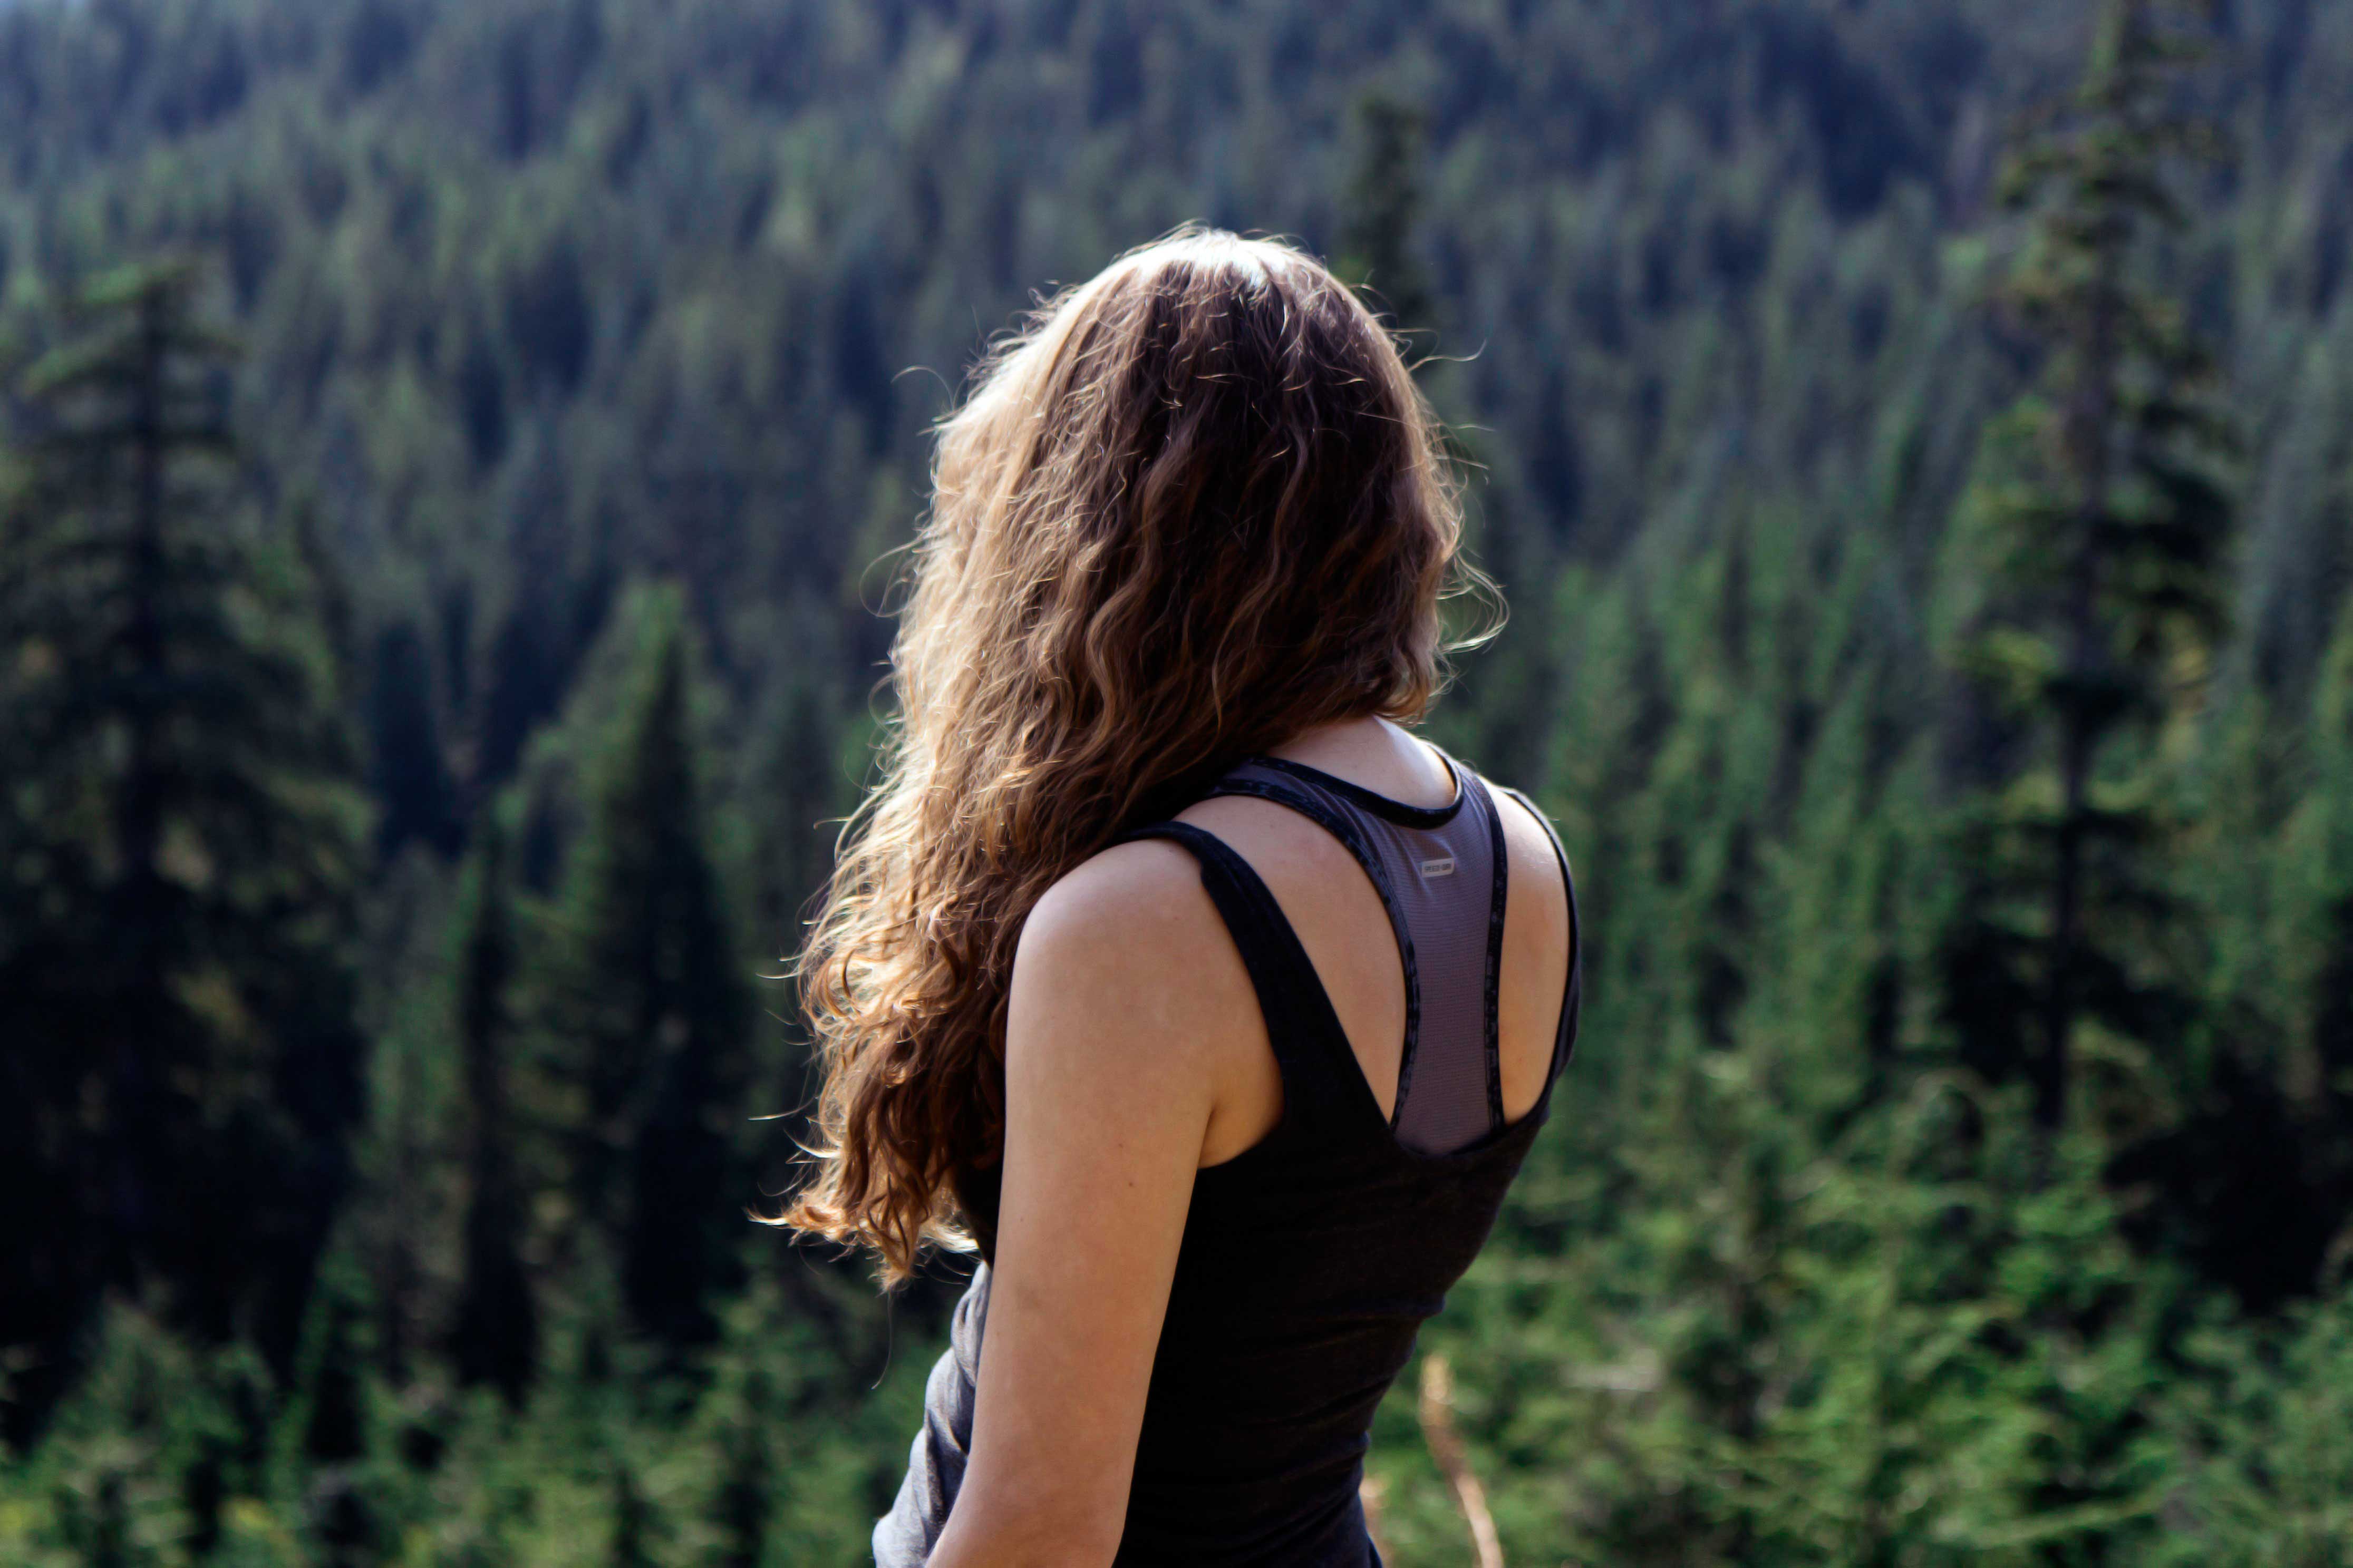 sad girl wallpaper,hair,people in nature,nature,photograph,beauty